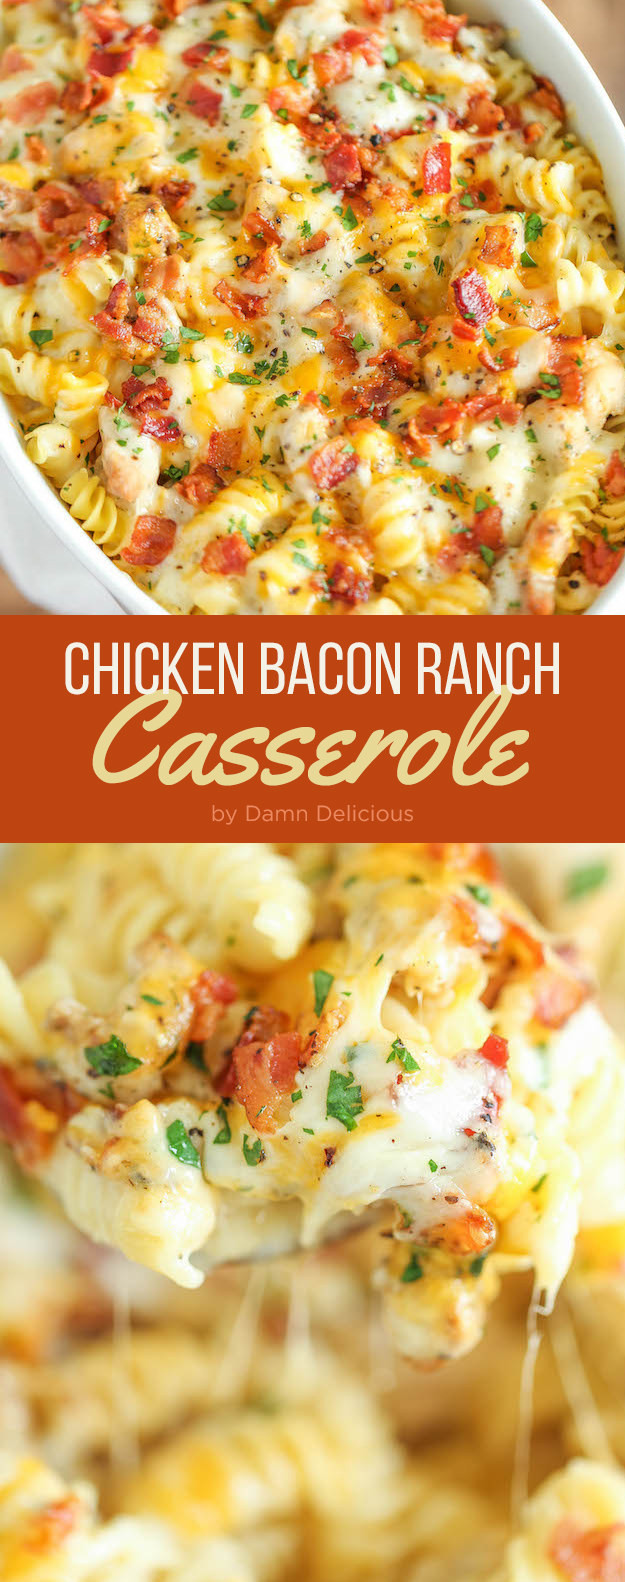 Awesome Dinner Ideas
 7 Awesome Ideas For Easy Weeknight Dinners